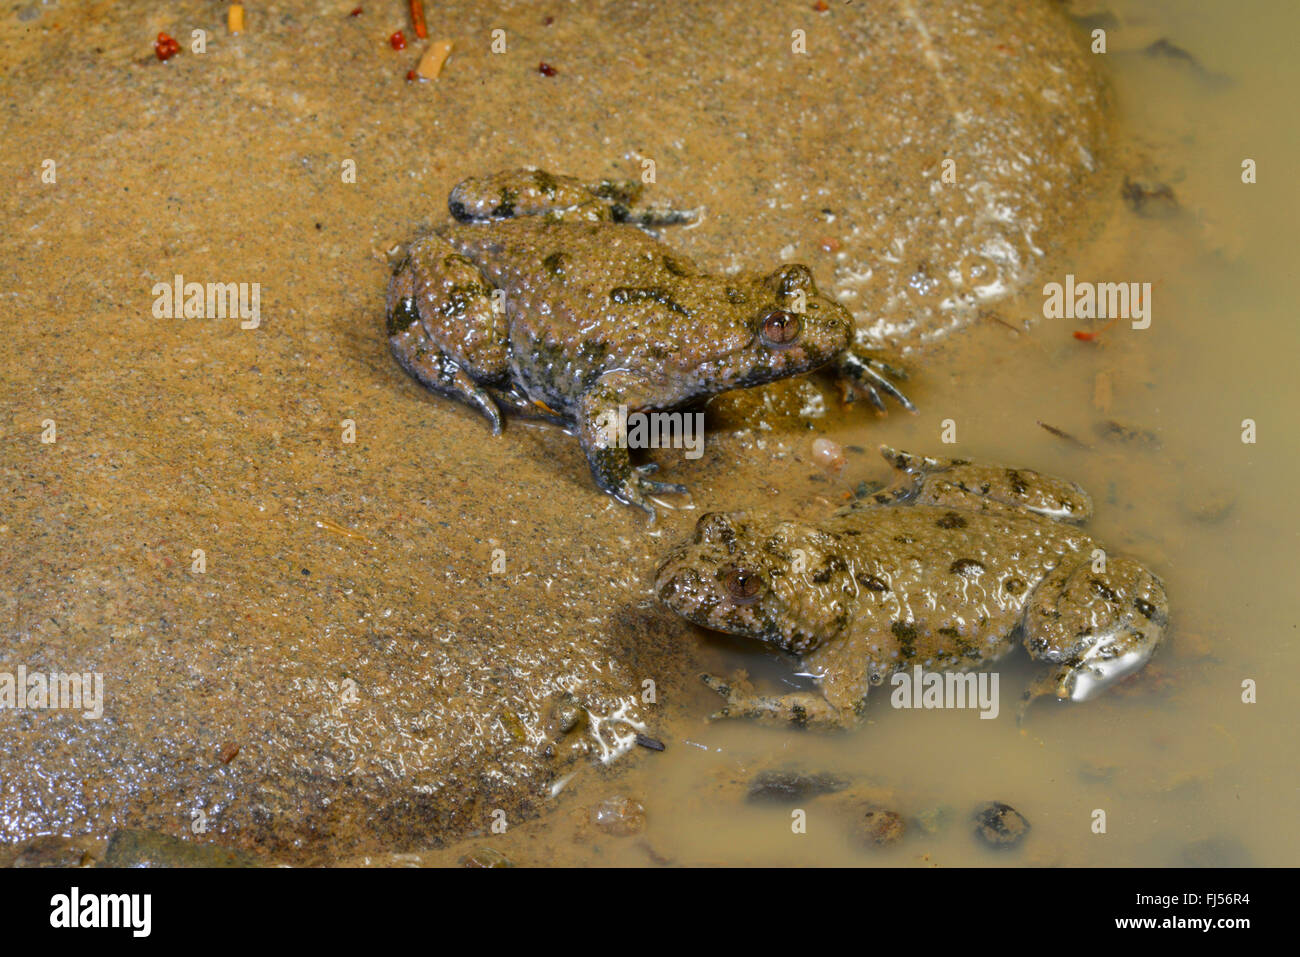 yellow-bellied toad, yellowbelly toad, variegated fire-toad (Bombina variegata), two yellow-bellied toads sitting at the edge of a muddy puddle, Romania Stock Photo